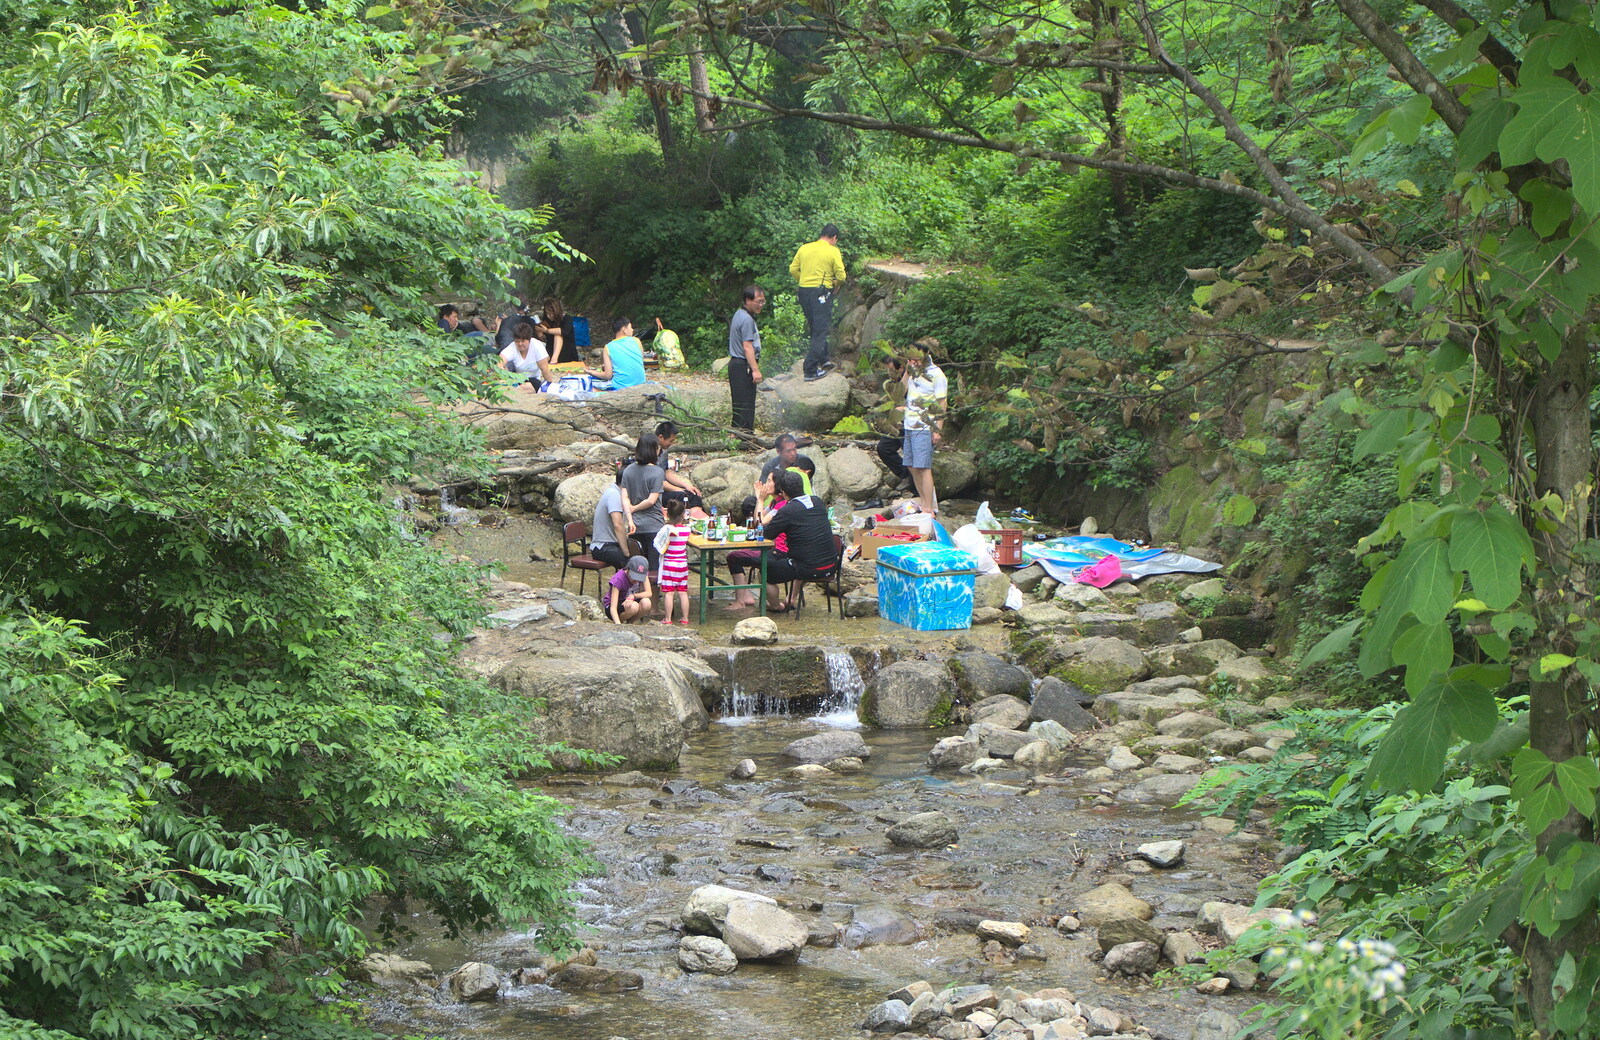 Back at the bottom, there's a picnic in the river from Working at Samsung, and Geumosan Mountain, Gumi, Gyeongsangbuk-do, Korea - 24th June 2012